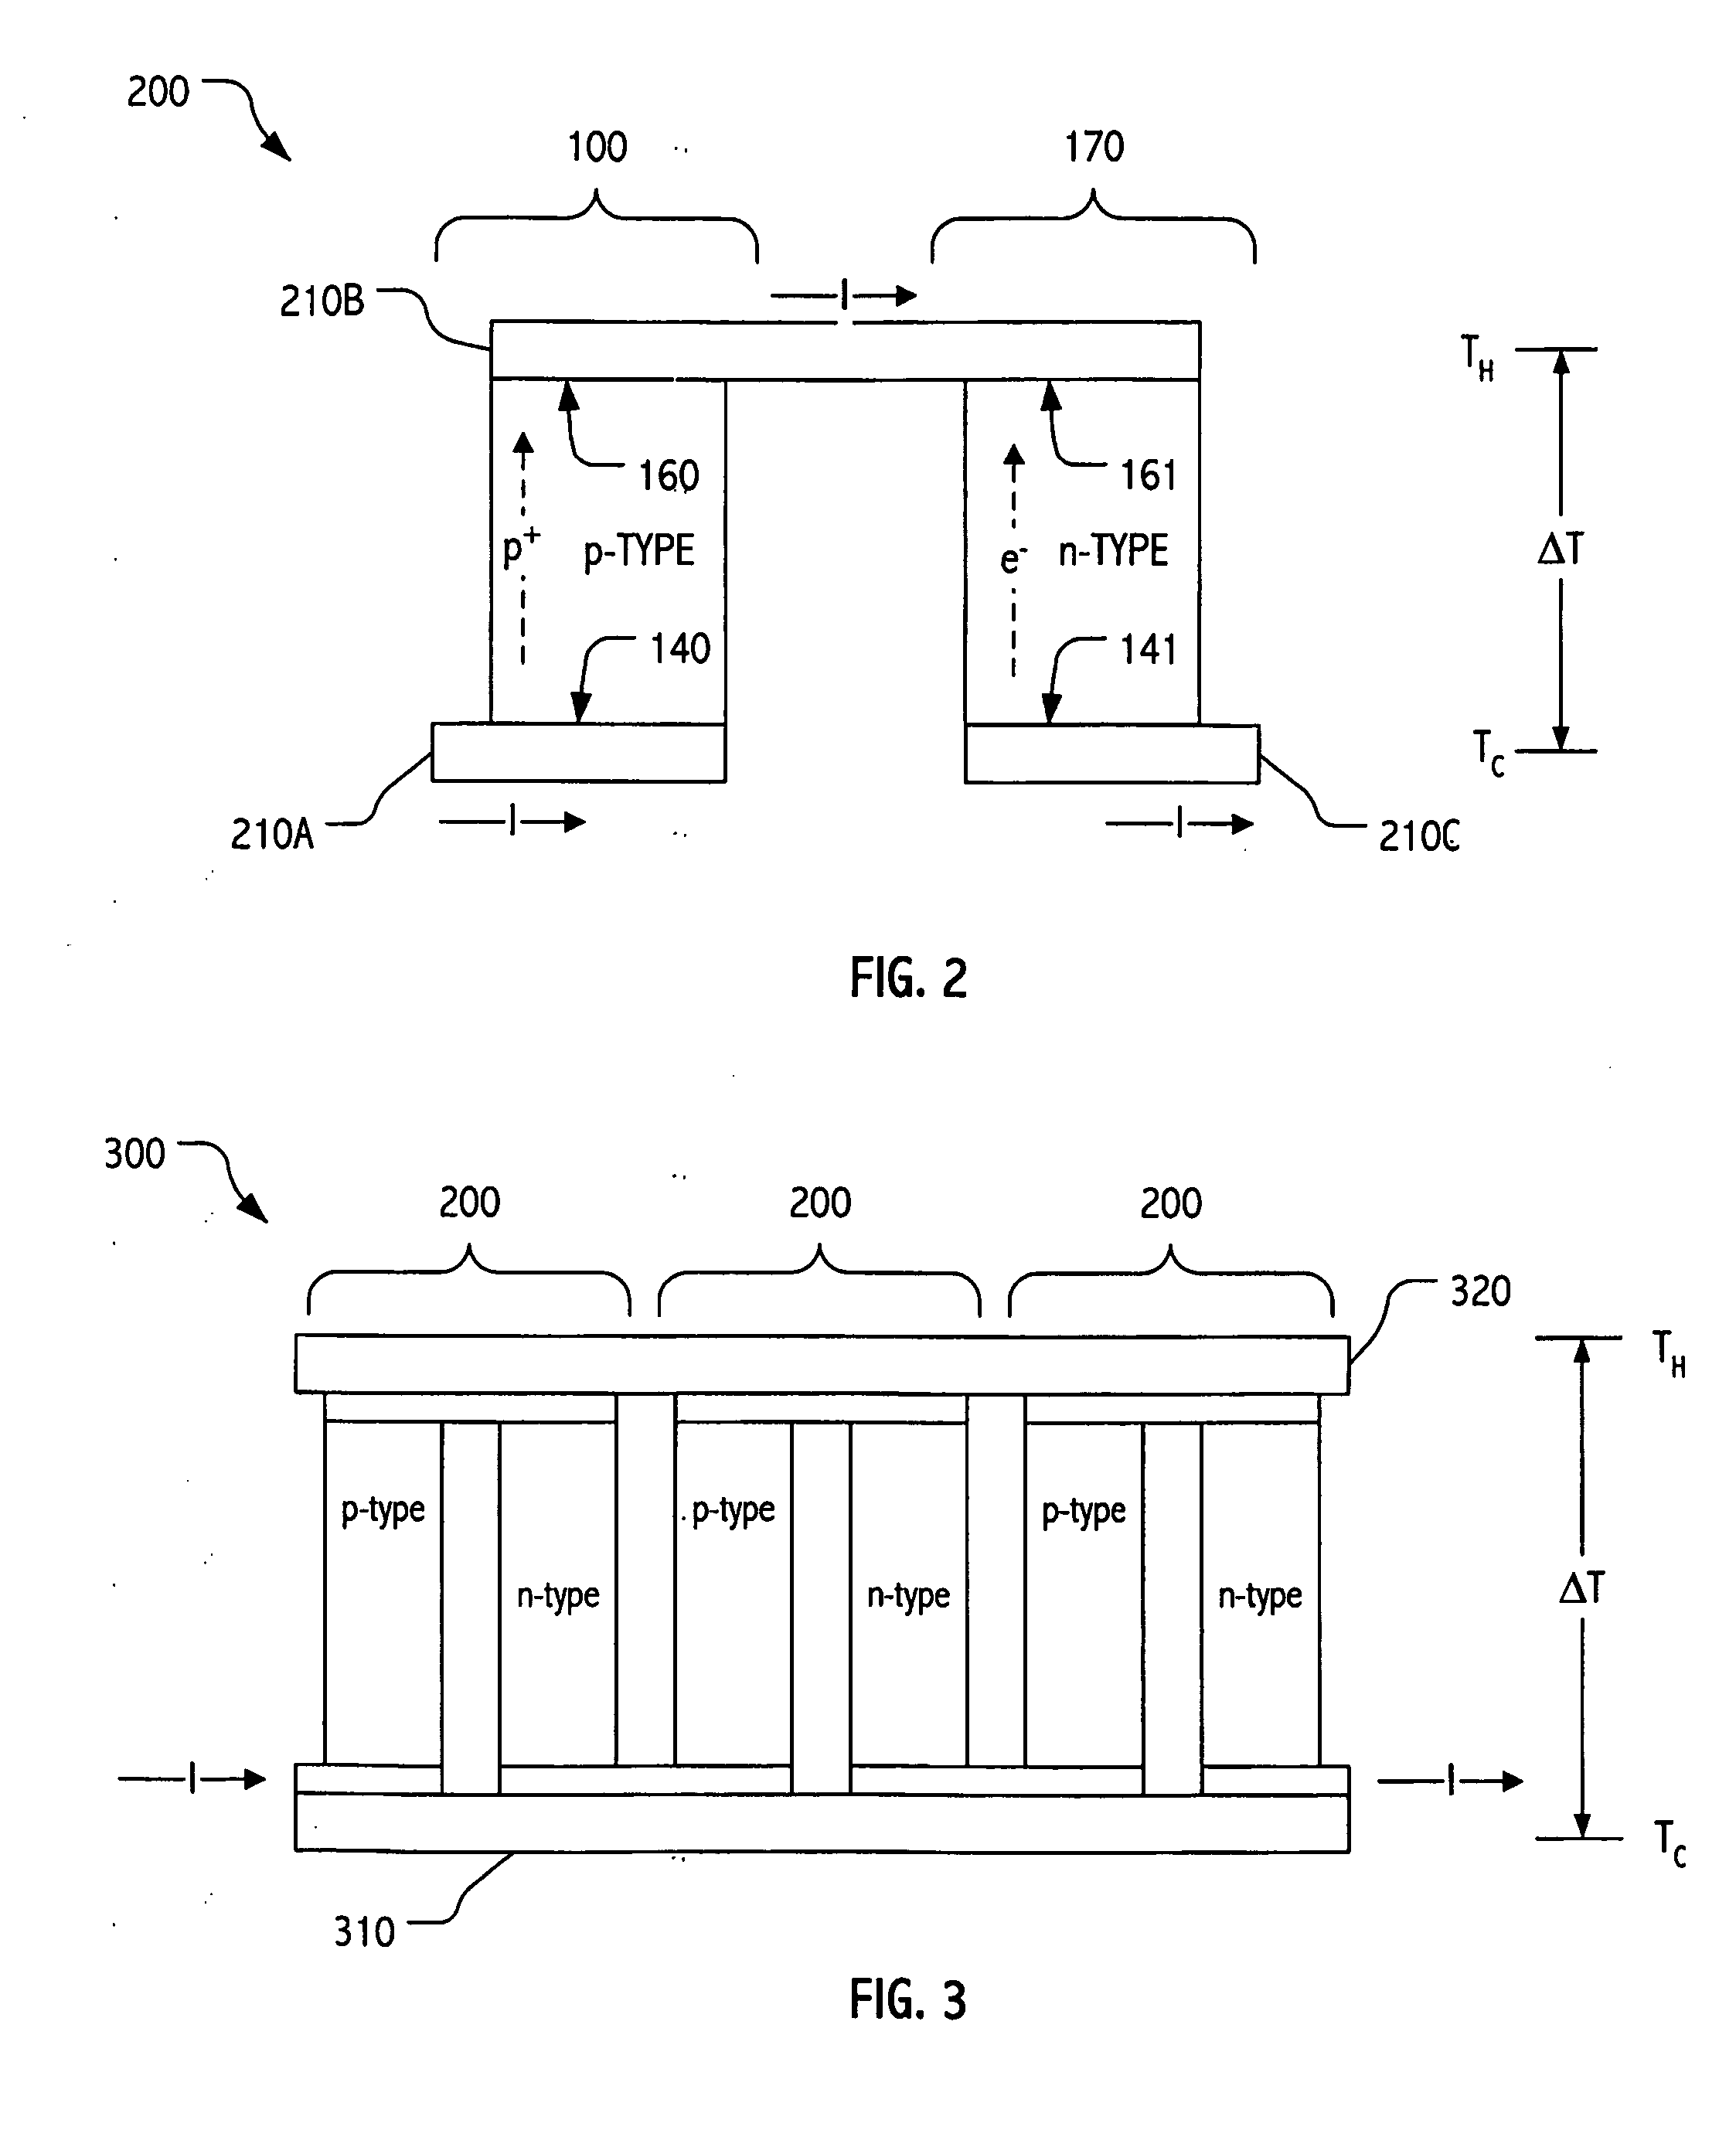 Counterflow thermoelectric configuration employing thermal transfer fluid in closed cycle